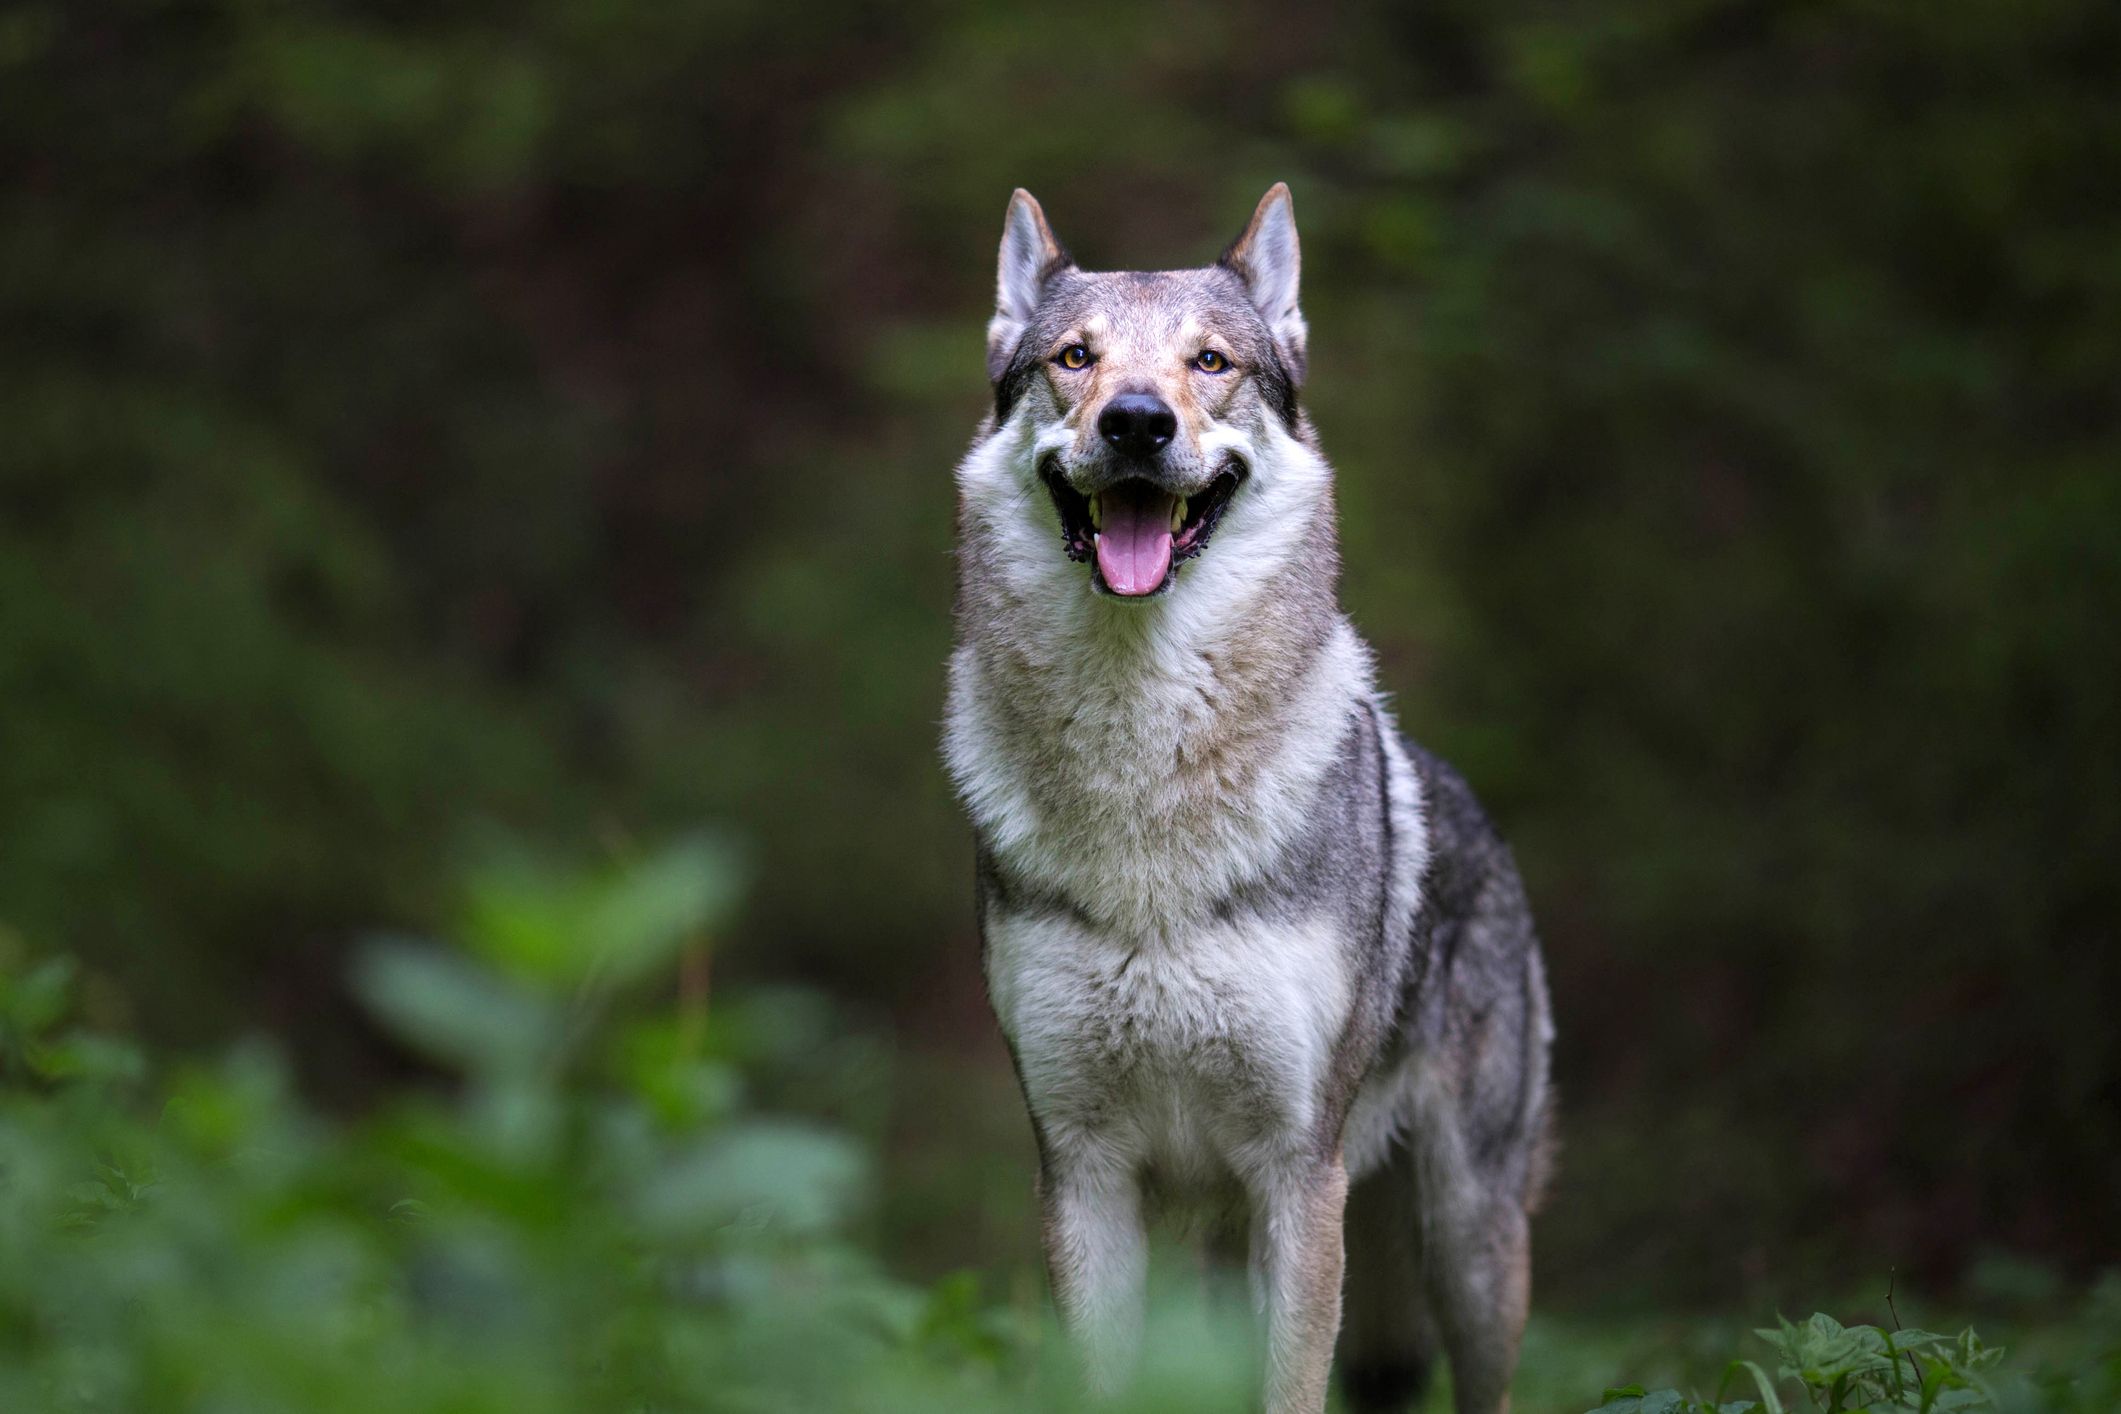 9 Dogs That Look Like Wolves Alaskan Malamute, Siberian Husky, and more